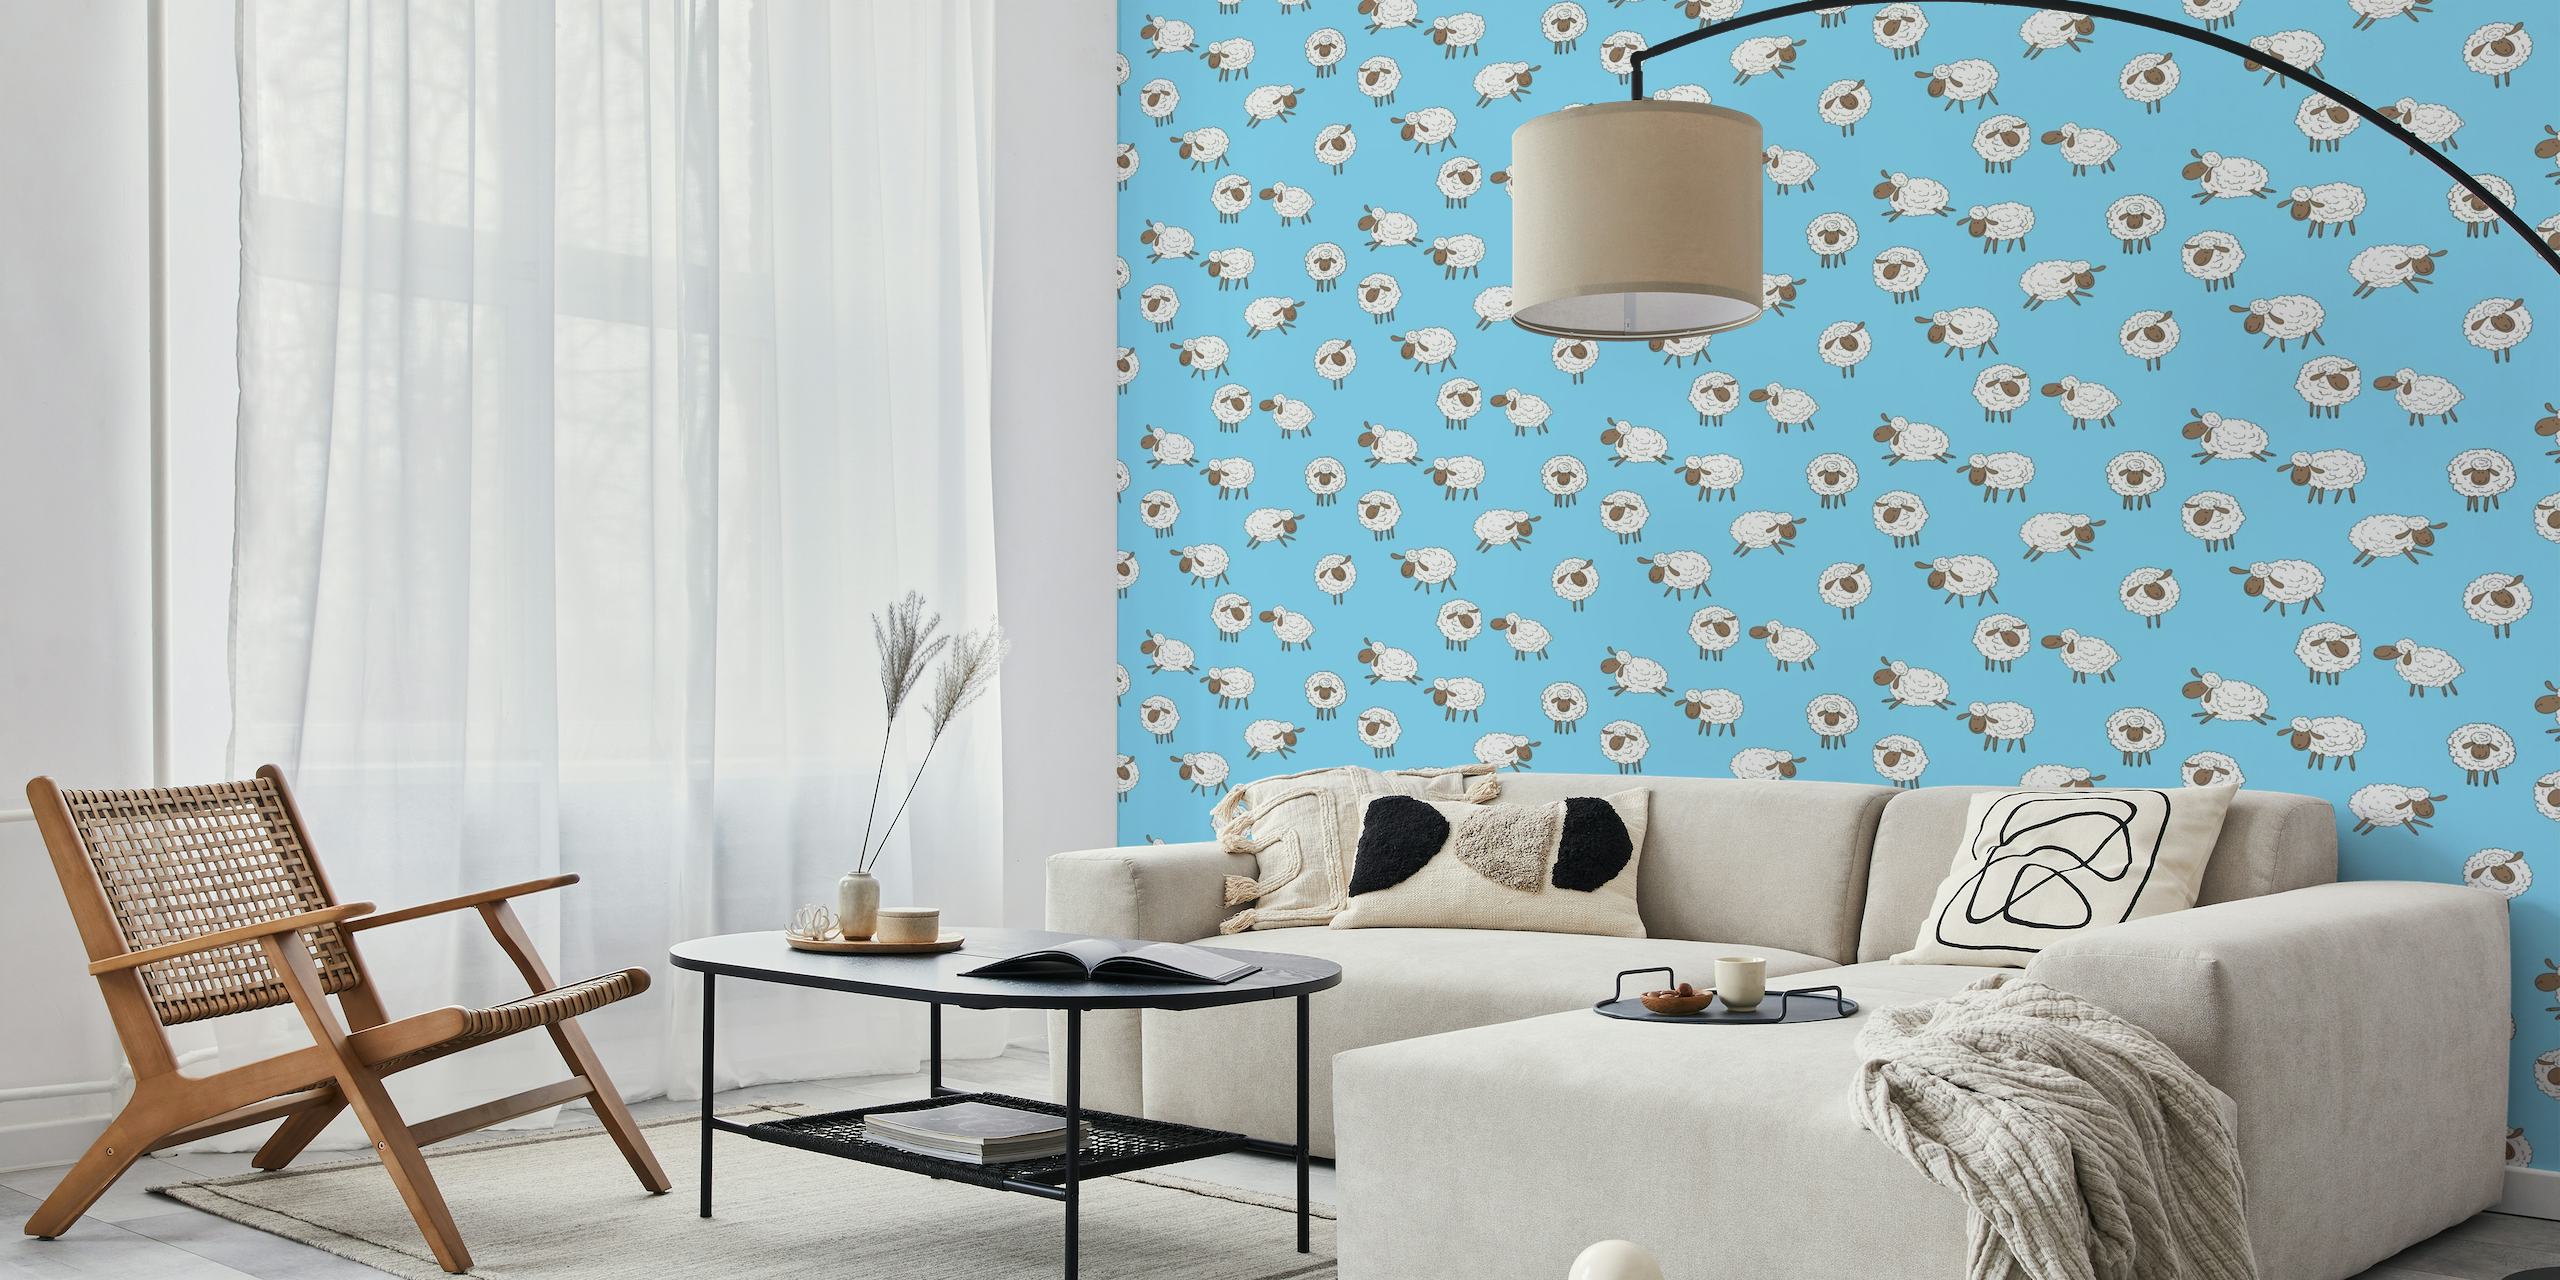 Counting sheep on baby blue wallpaper